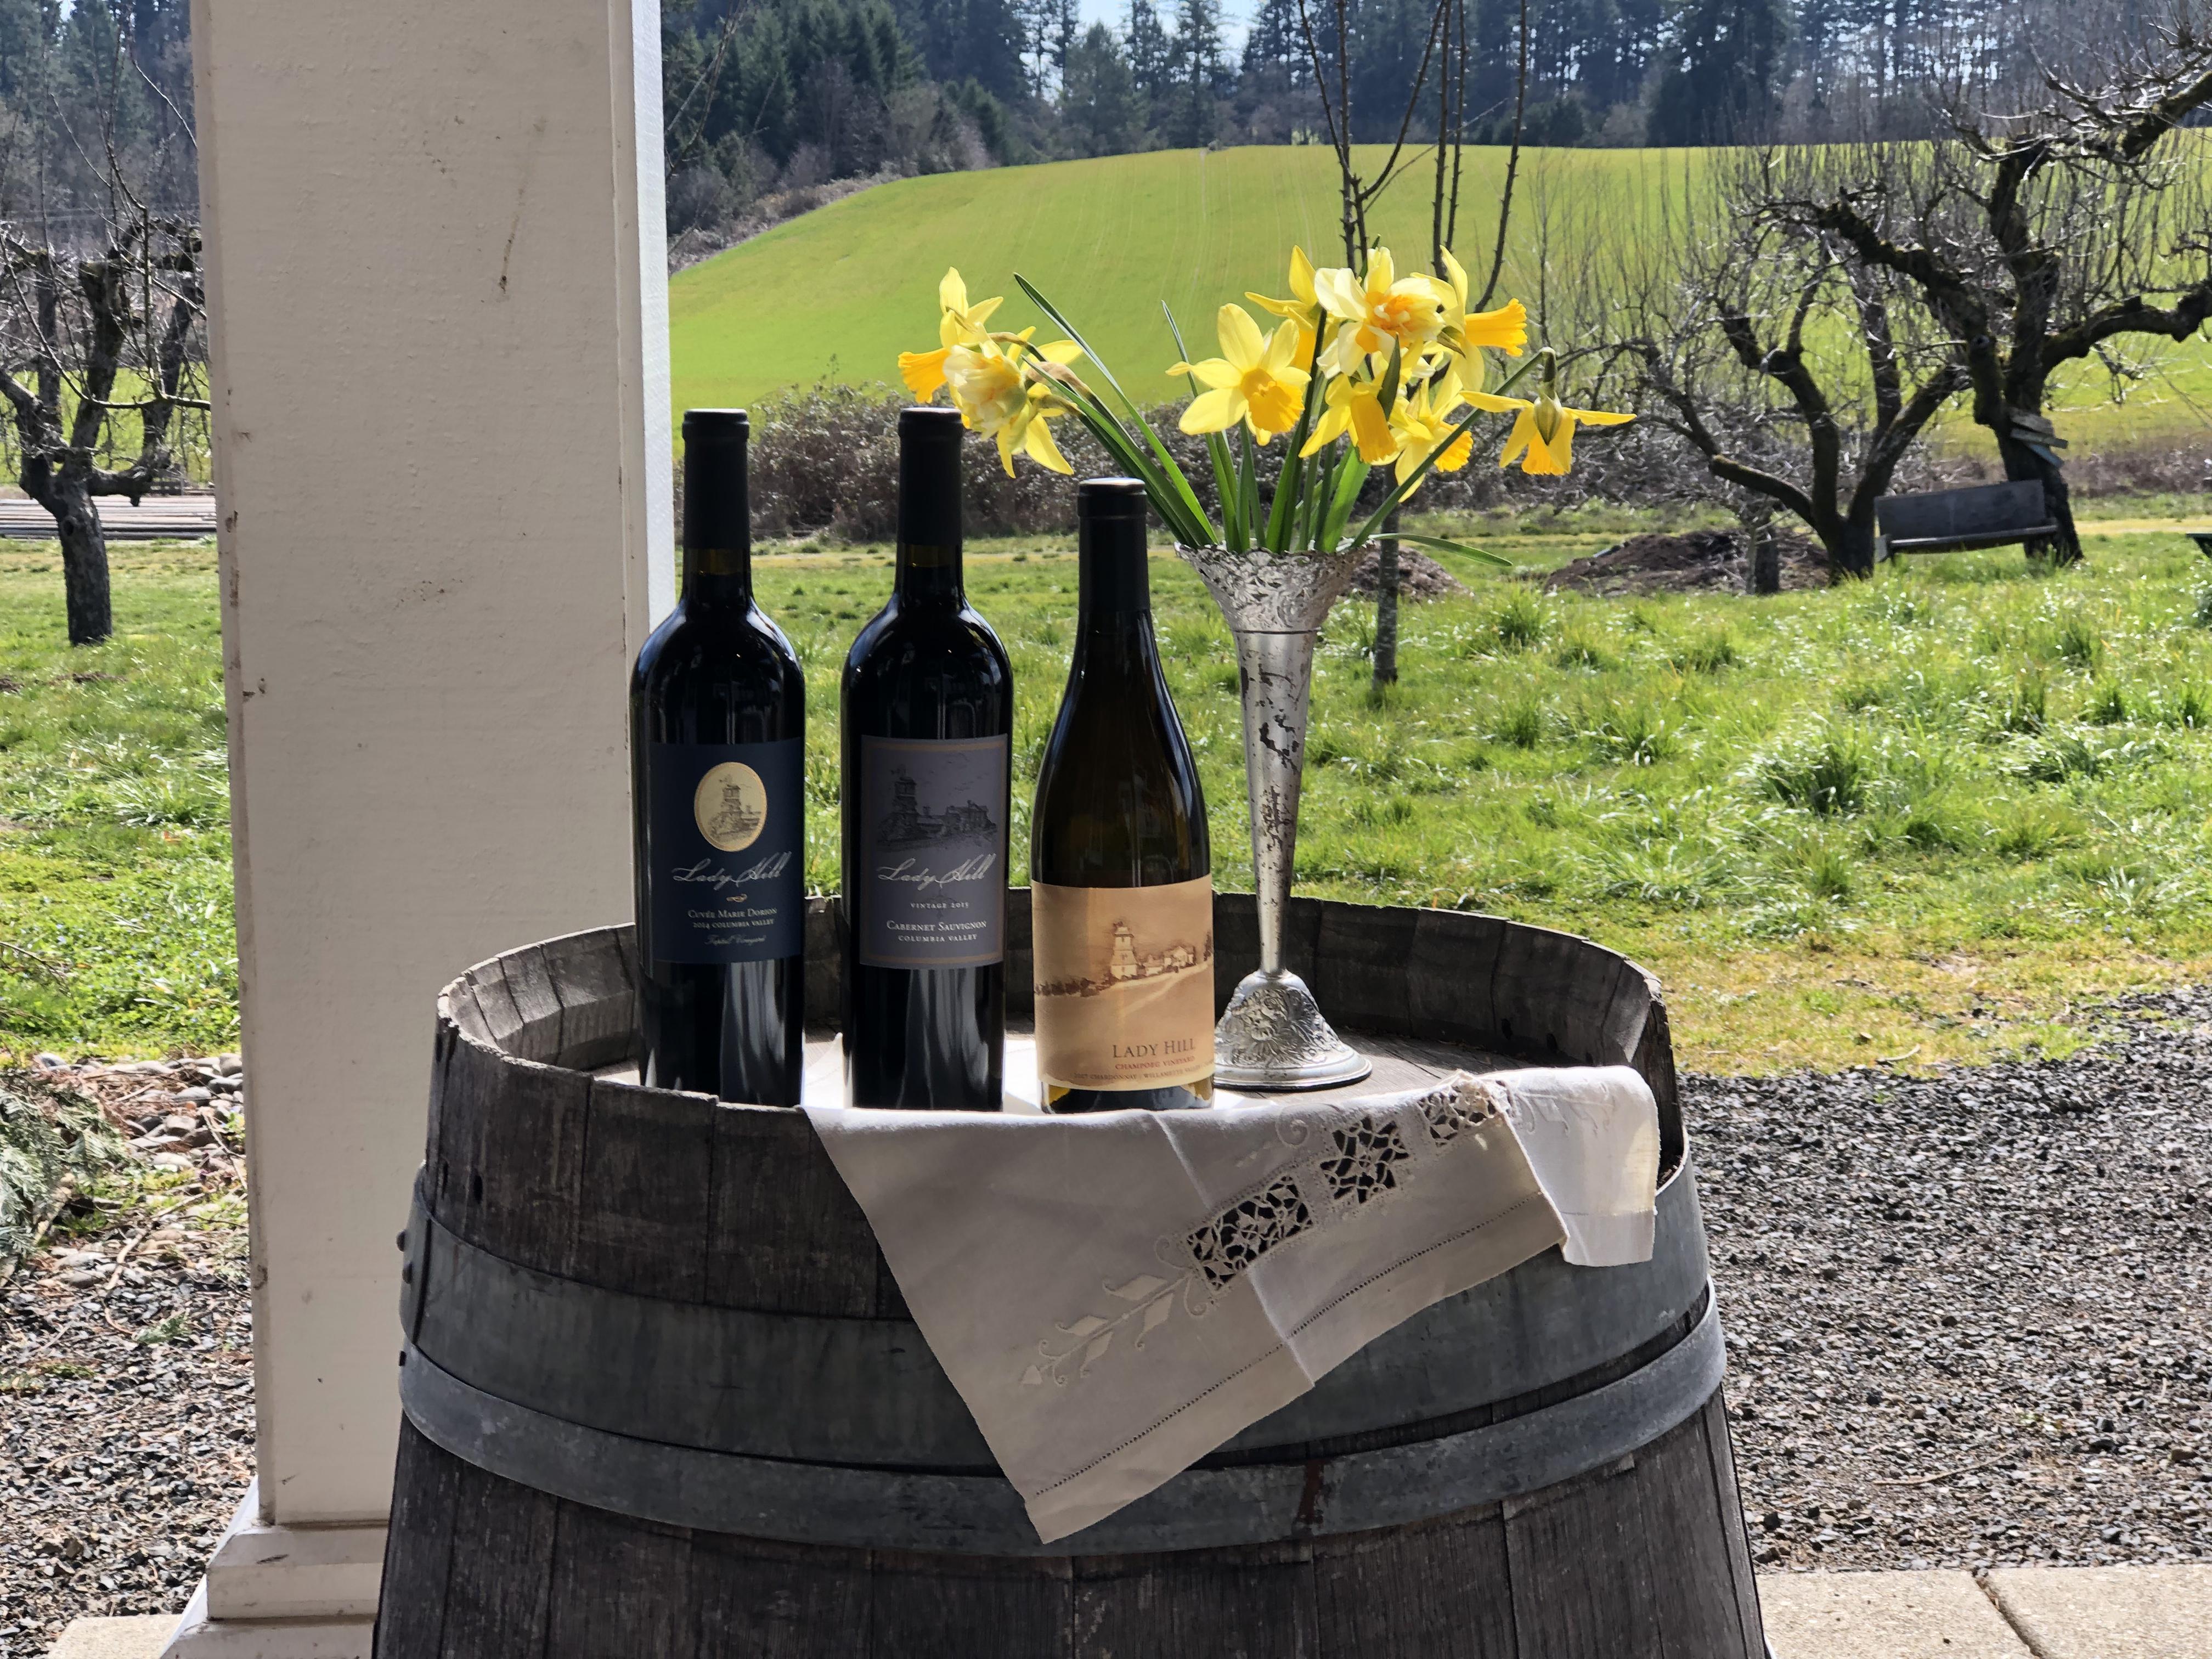 Image for Lady Hill Winery